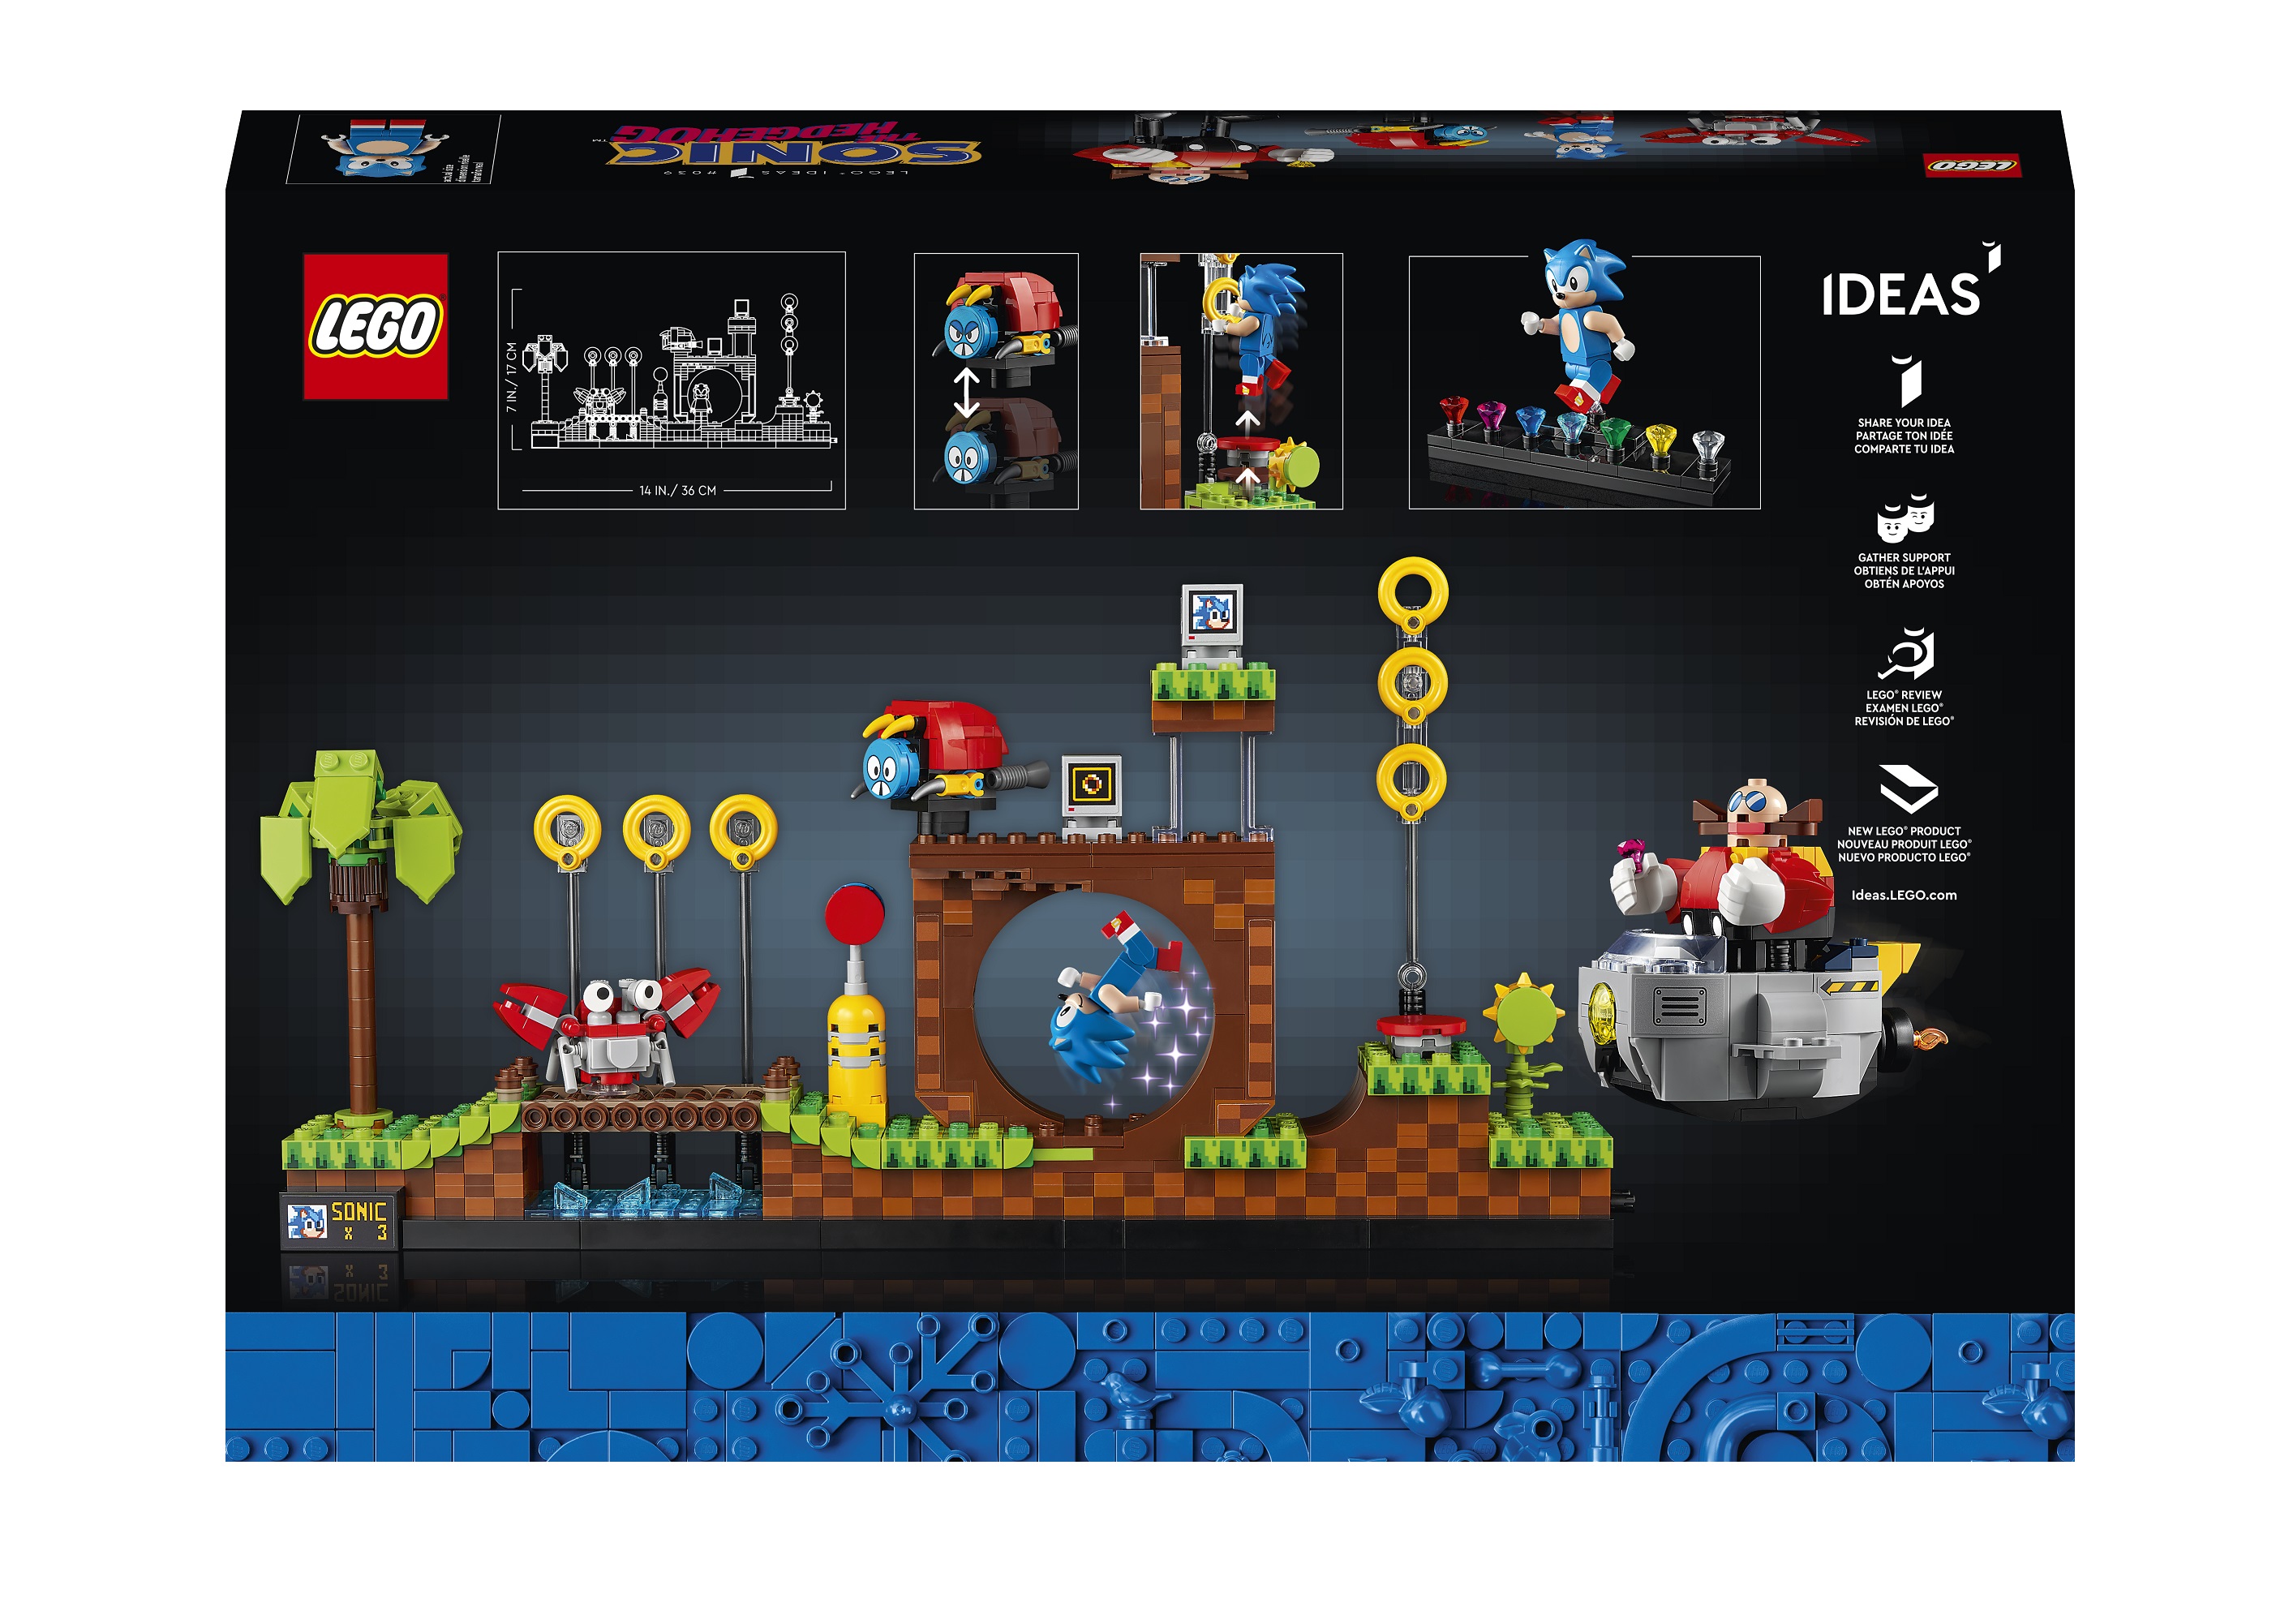 LEGO Ideas - Official Sonic the Hedgehog Green Hill Zone Set